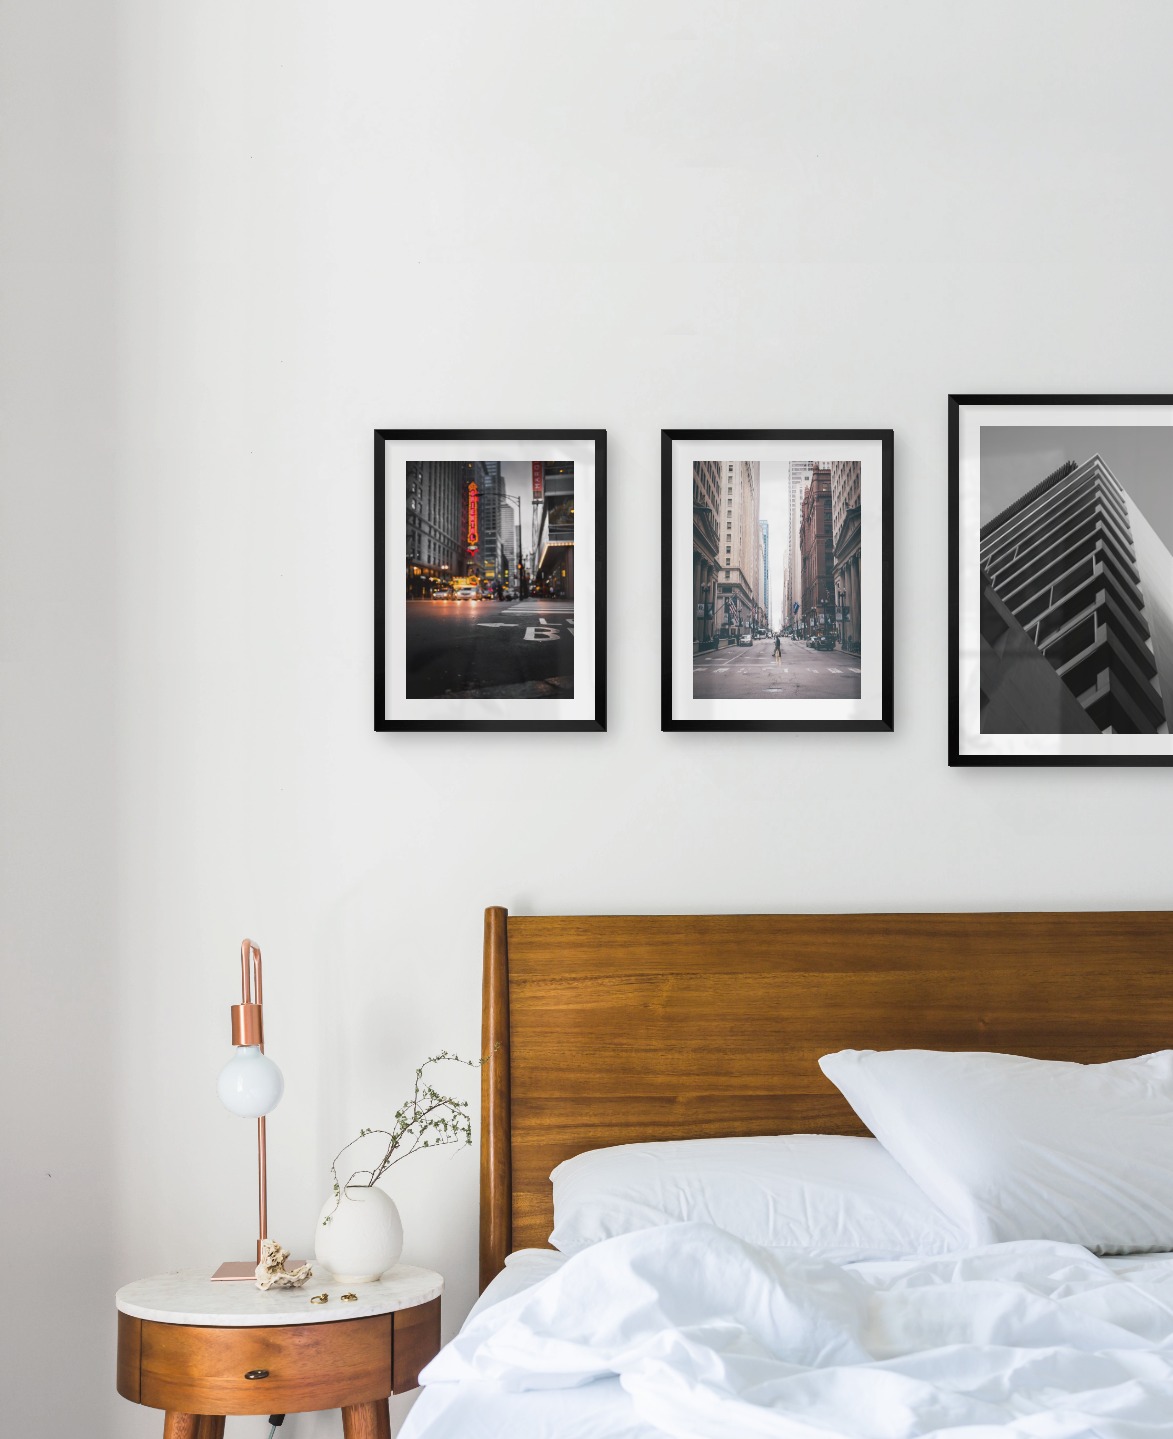 Gallery wall with picture frames in black in sizes 30x40 and 40x50 with prints "Busy city center", "Man walking across the street" and "Black and white building"